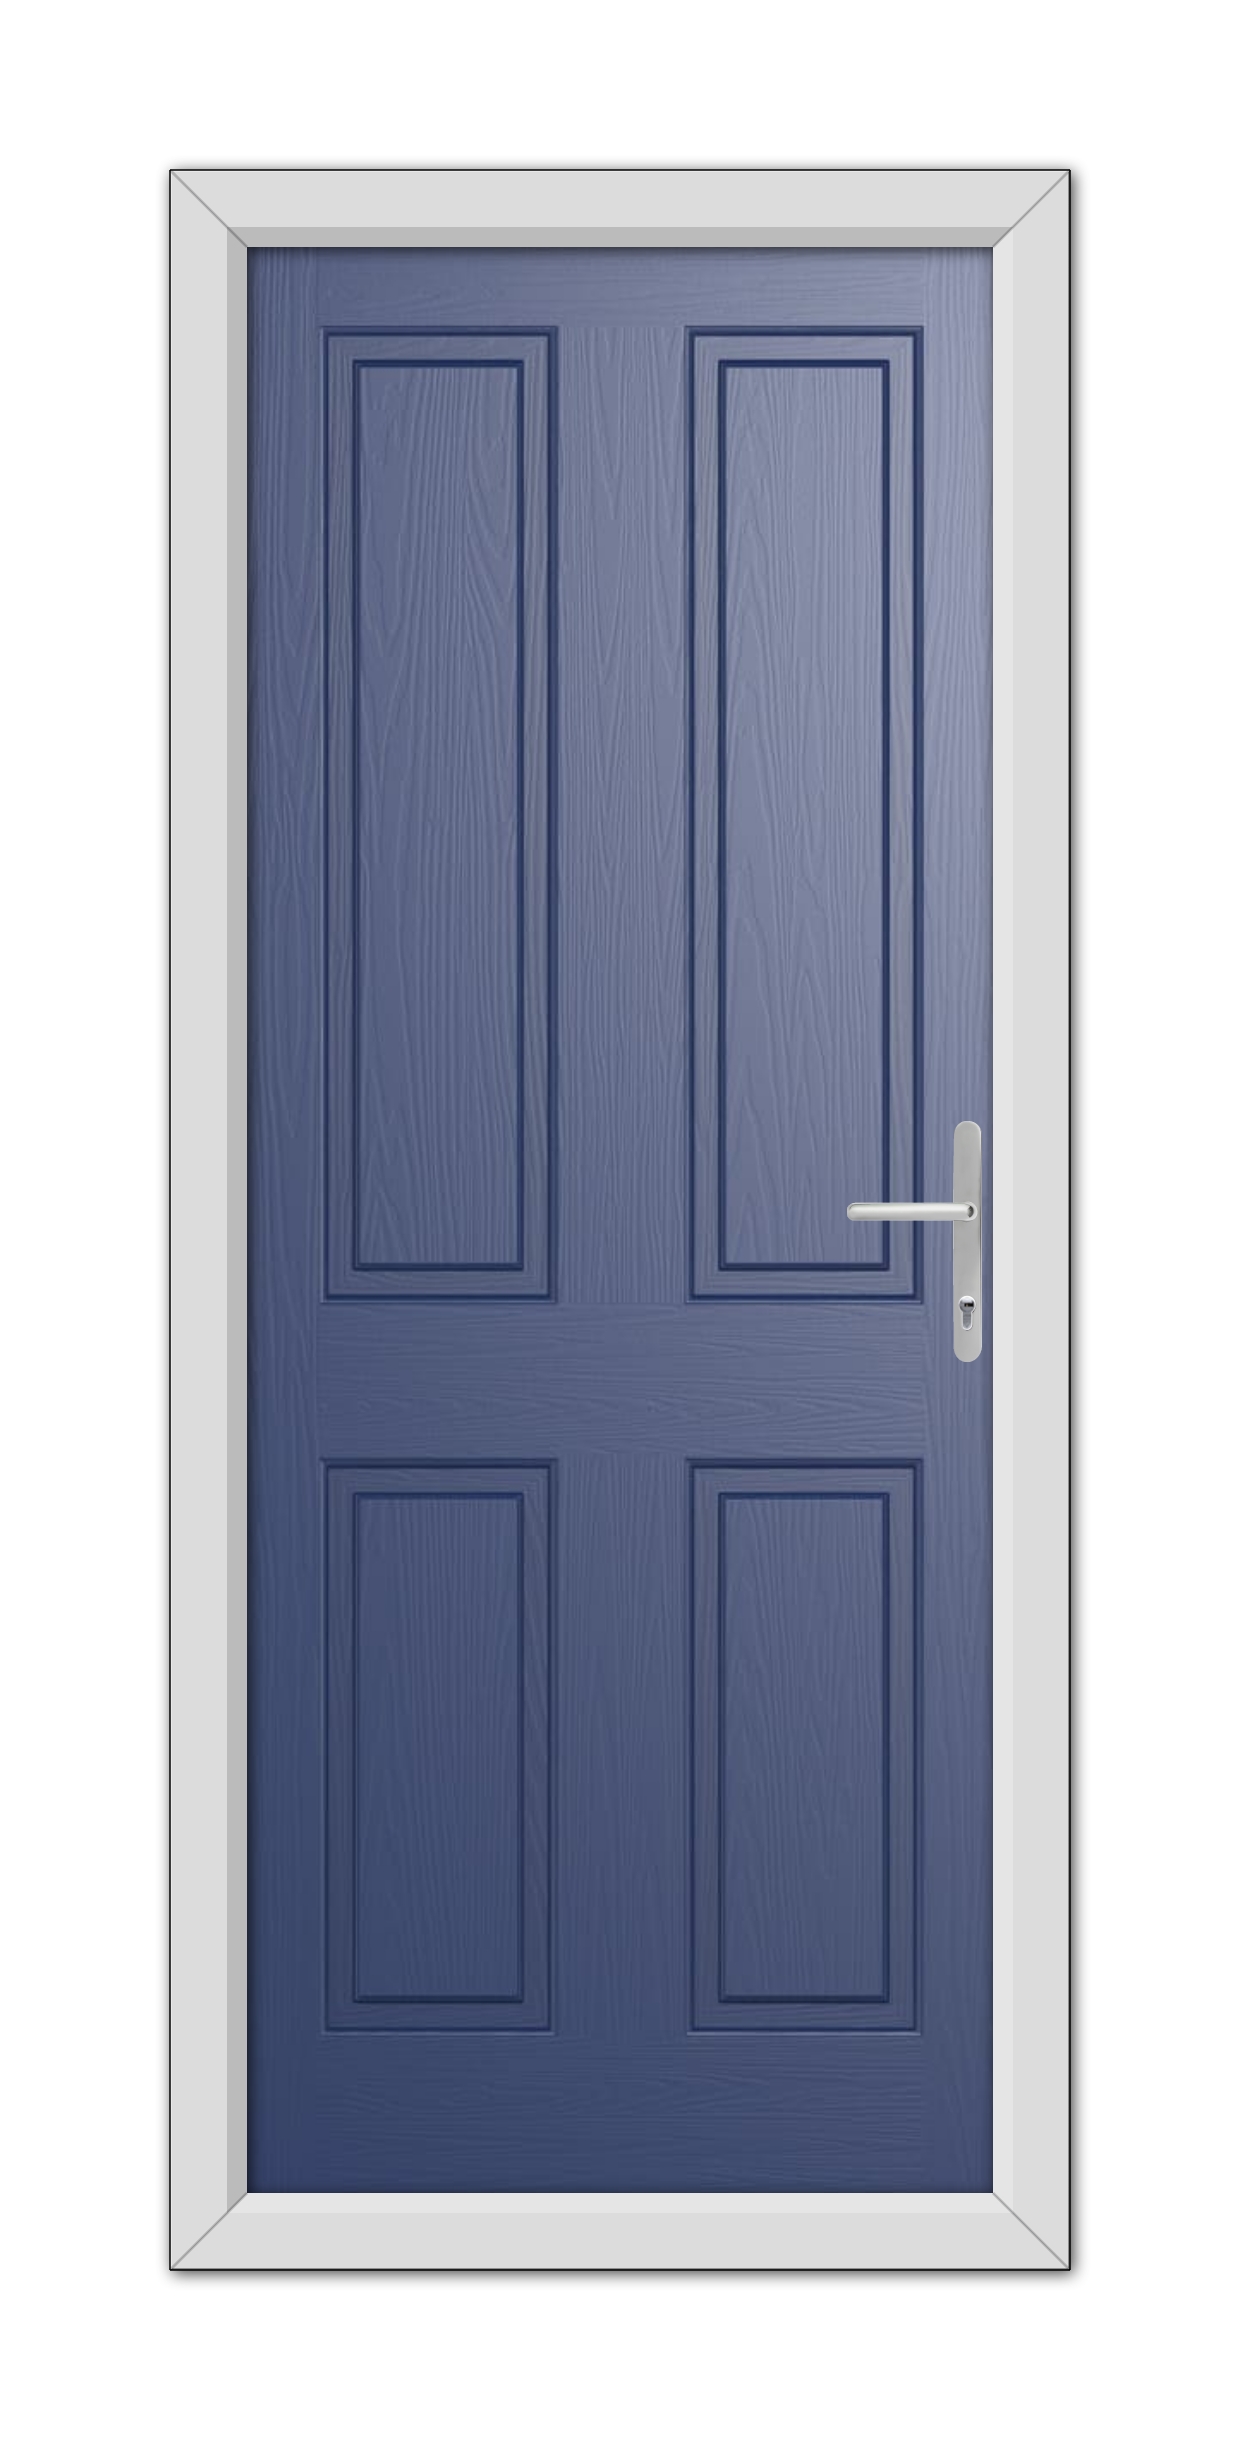 A modern, Blue Whitmore Solid Composite Door 48mm Timber Core with a white frame and a metal handle, isolated on a white background.